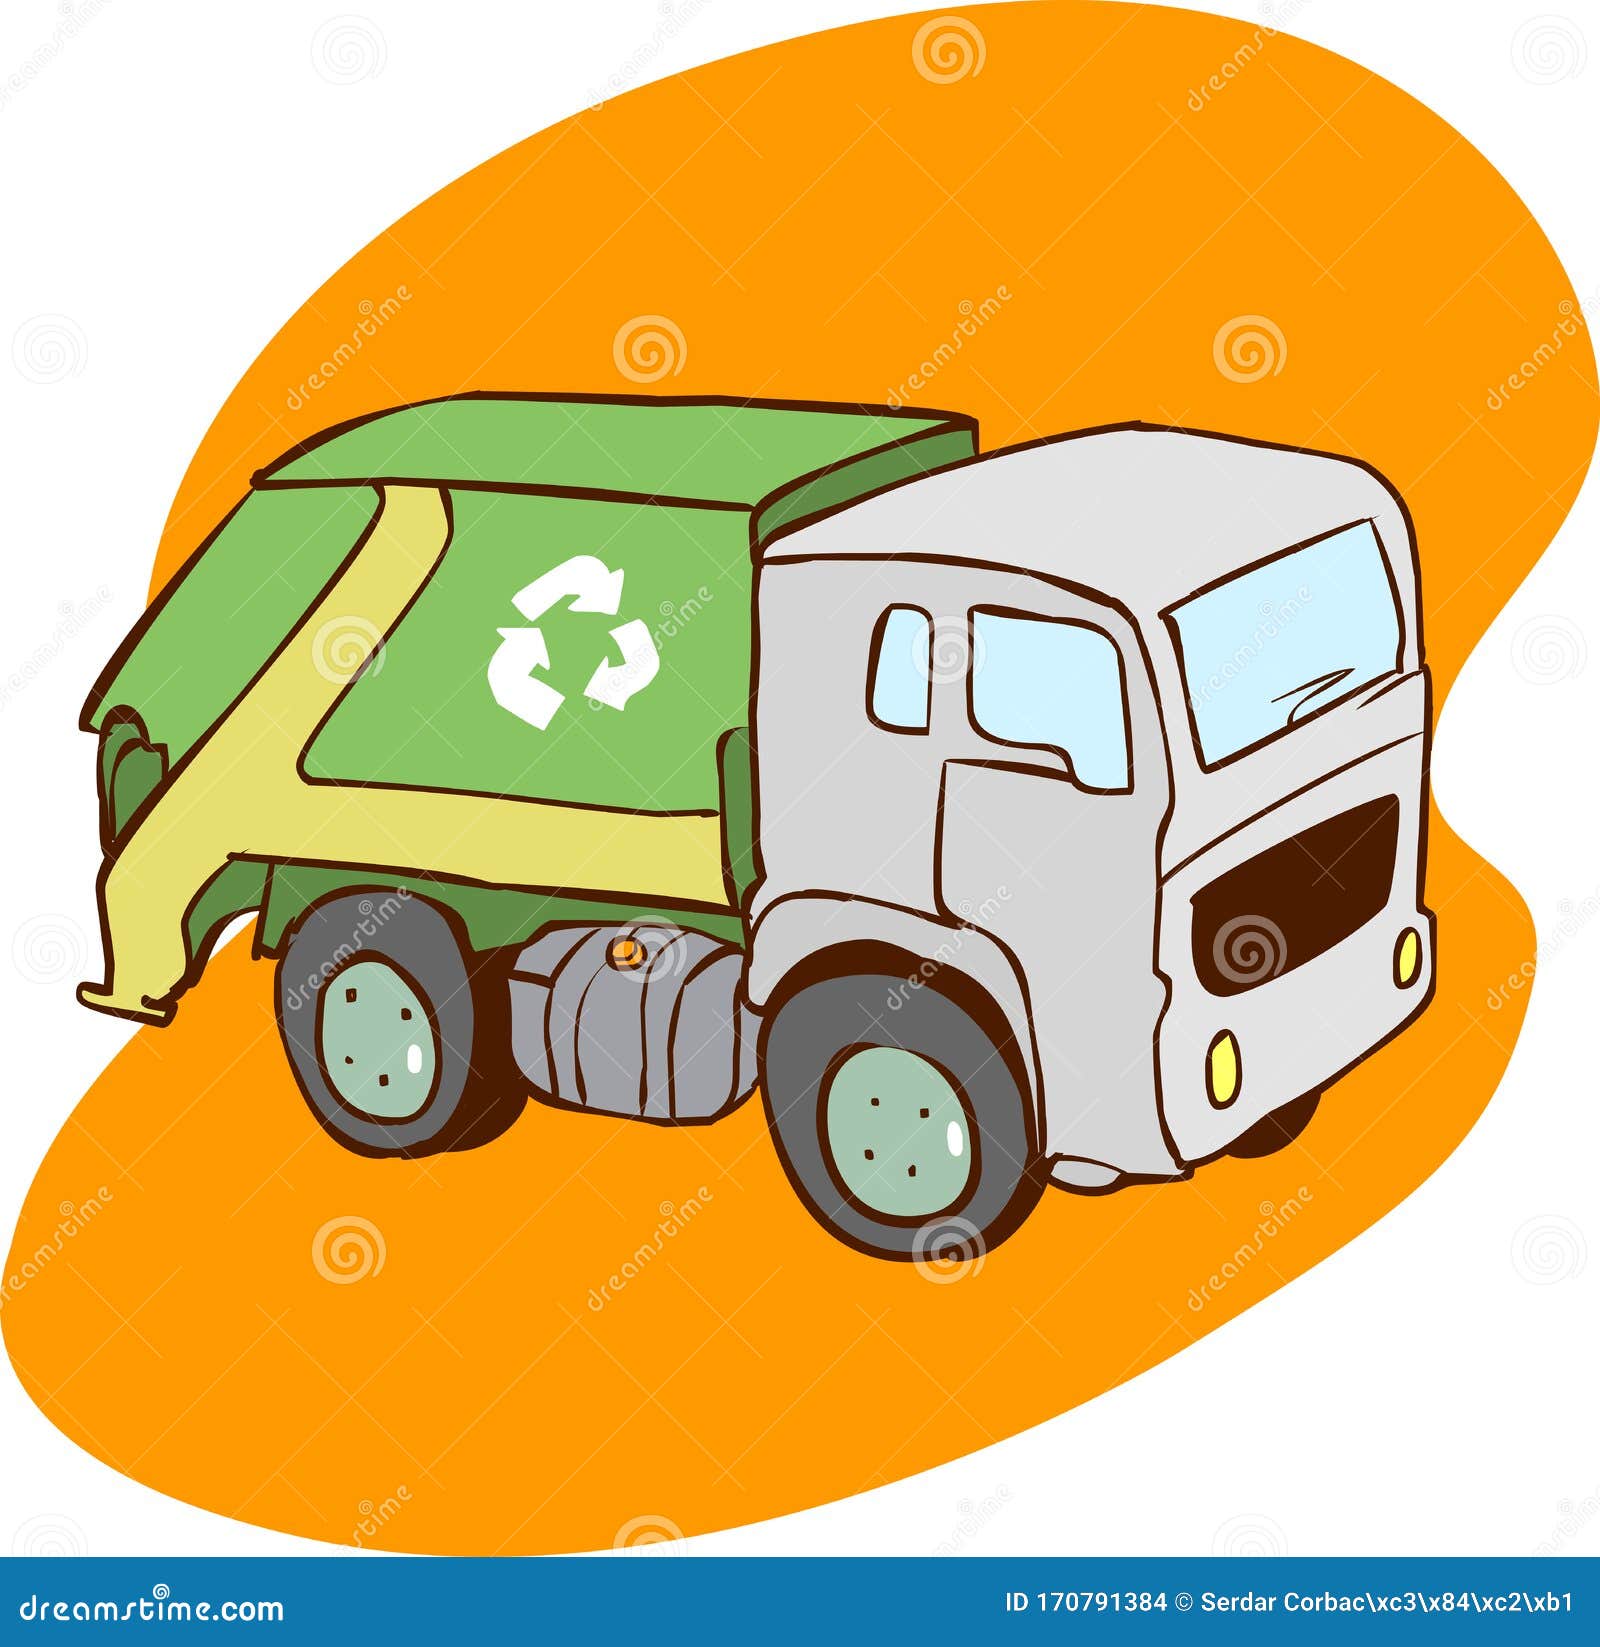 Sorting, Transporting Process of Garbage, Trash Can. Vector ...